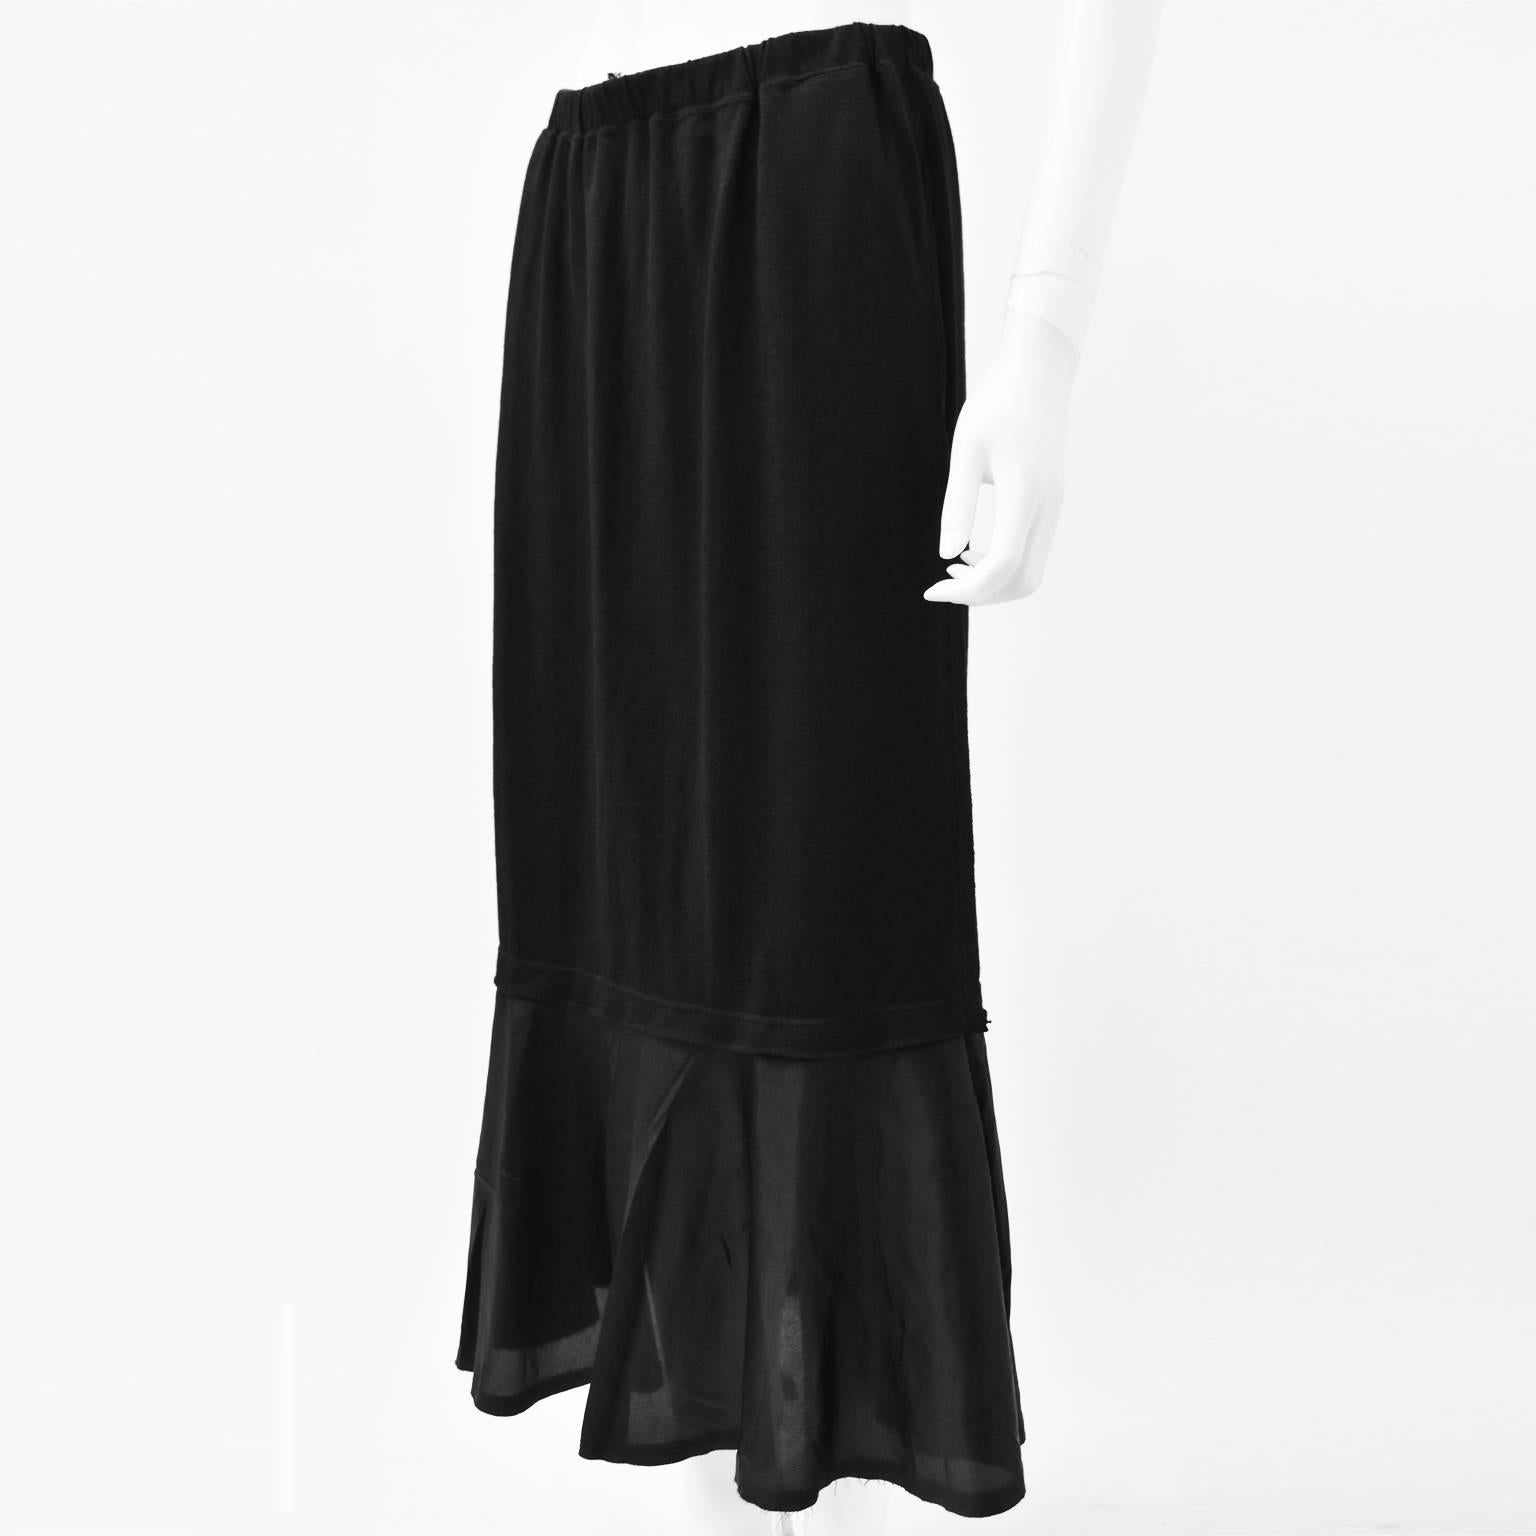 A classic and versatile black long skirt from Comme des Garcons. The skirt has a long, straight silhouette with a slight flare in the bottom where there is the contrasting panel of material. It has an elasticated waist and is a Japanese size Medium